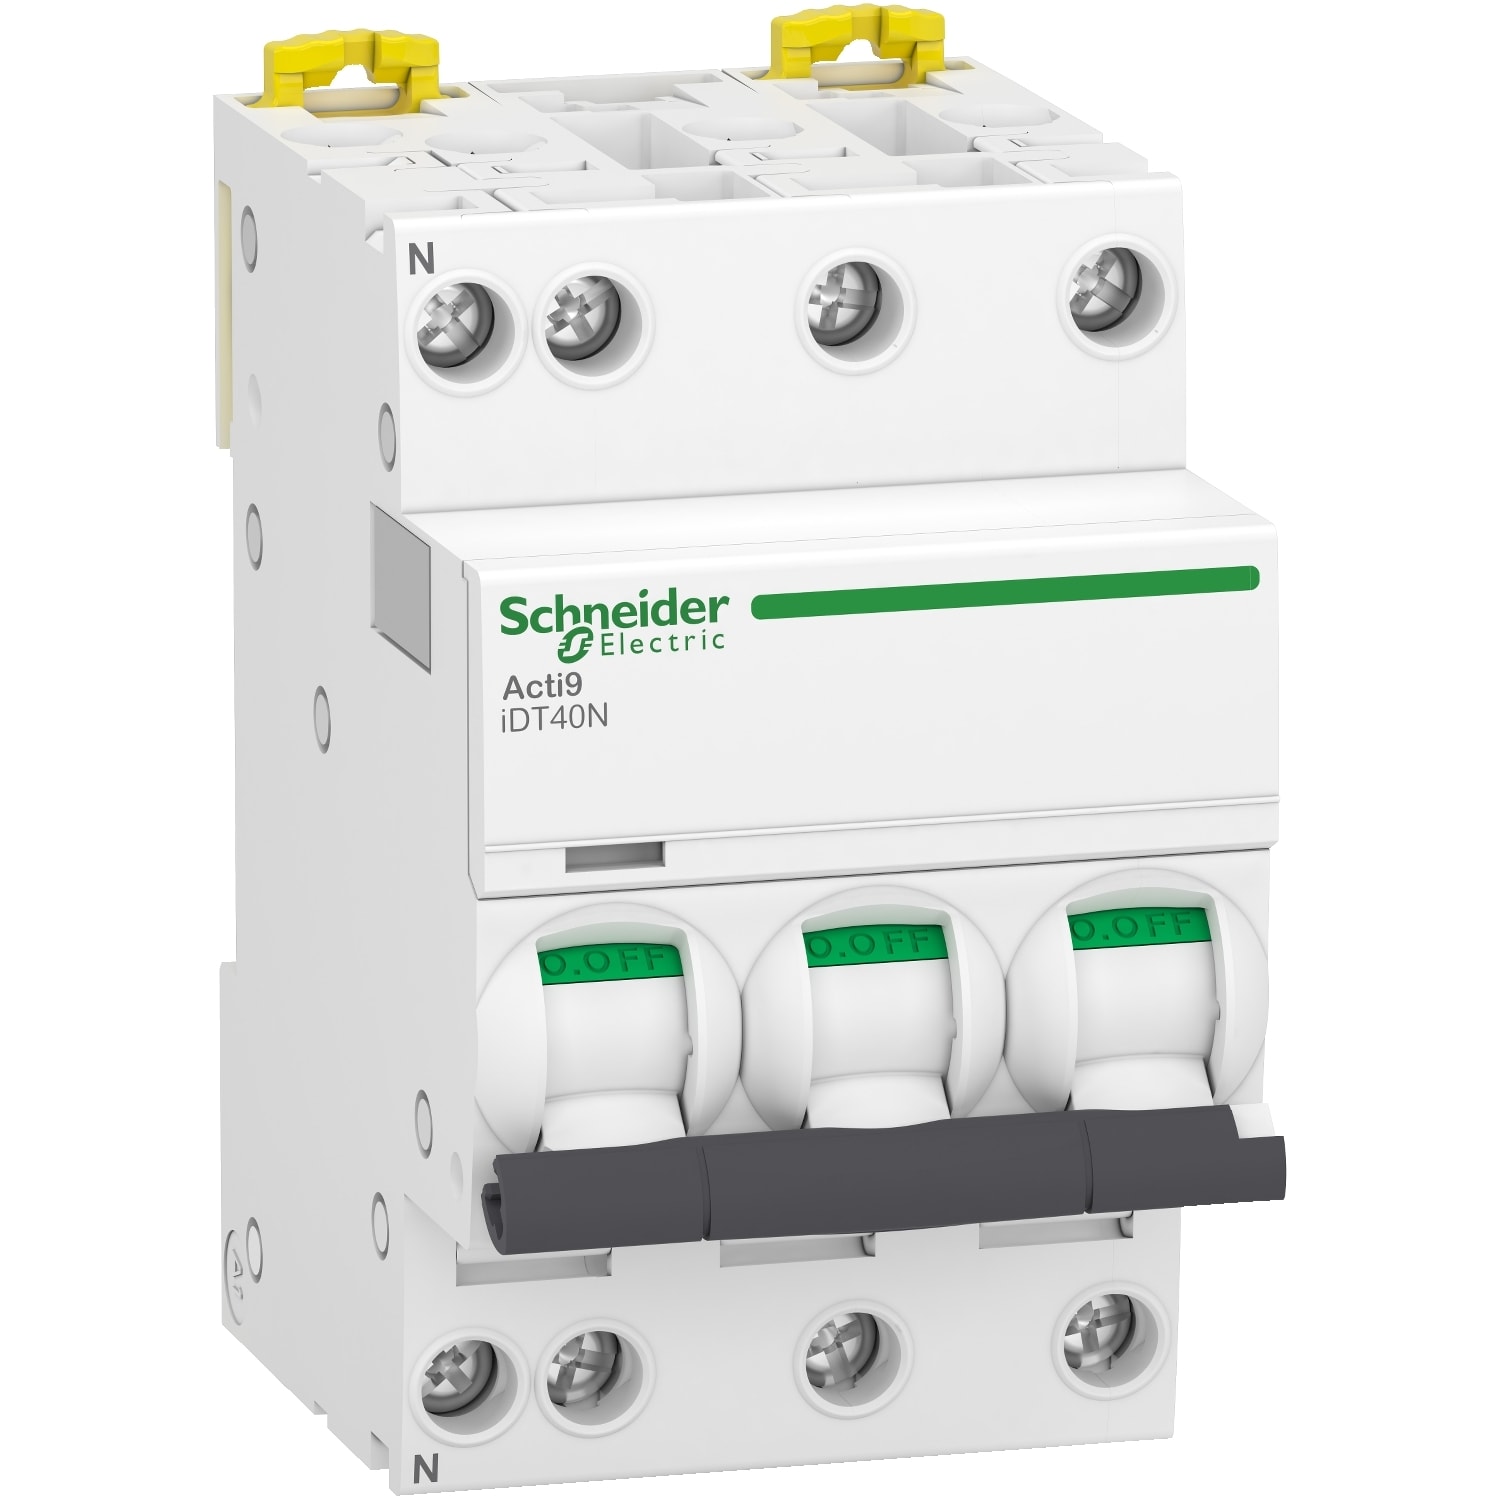 Schneider Electric - Acti9 iDT40N - Disjoncteur modulaire - 3P+N - 20A - Courbe C - 6000A-10kA